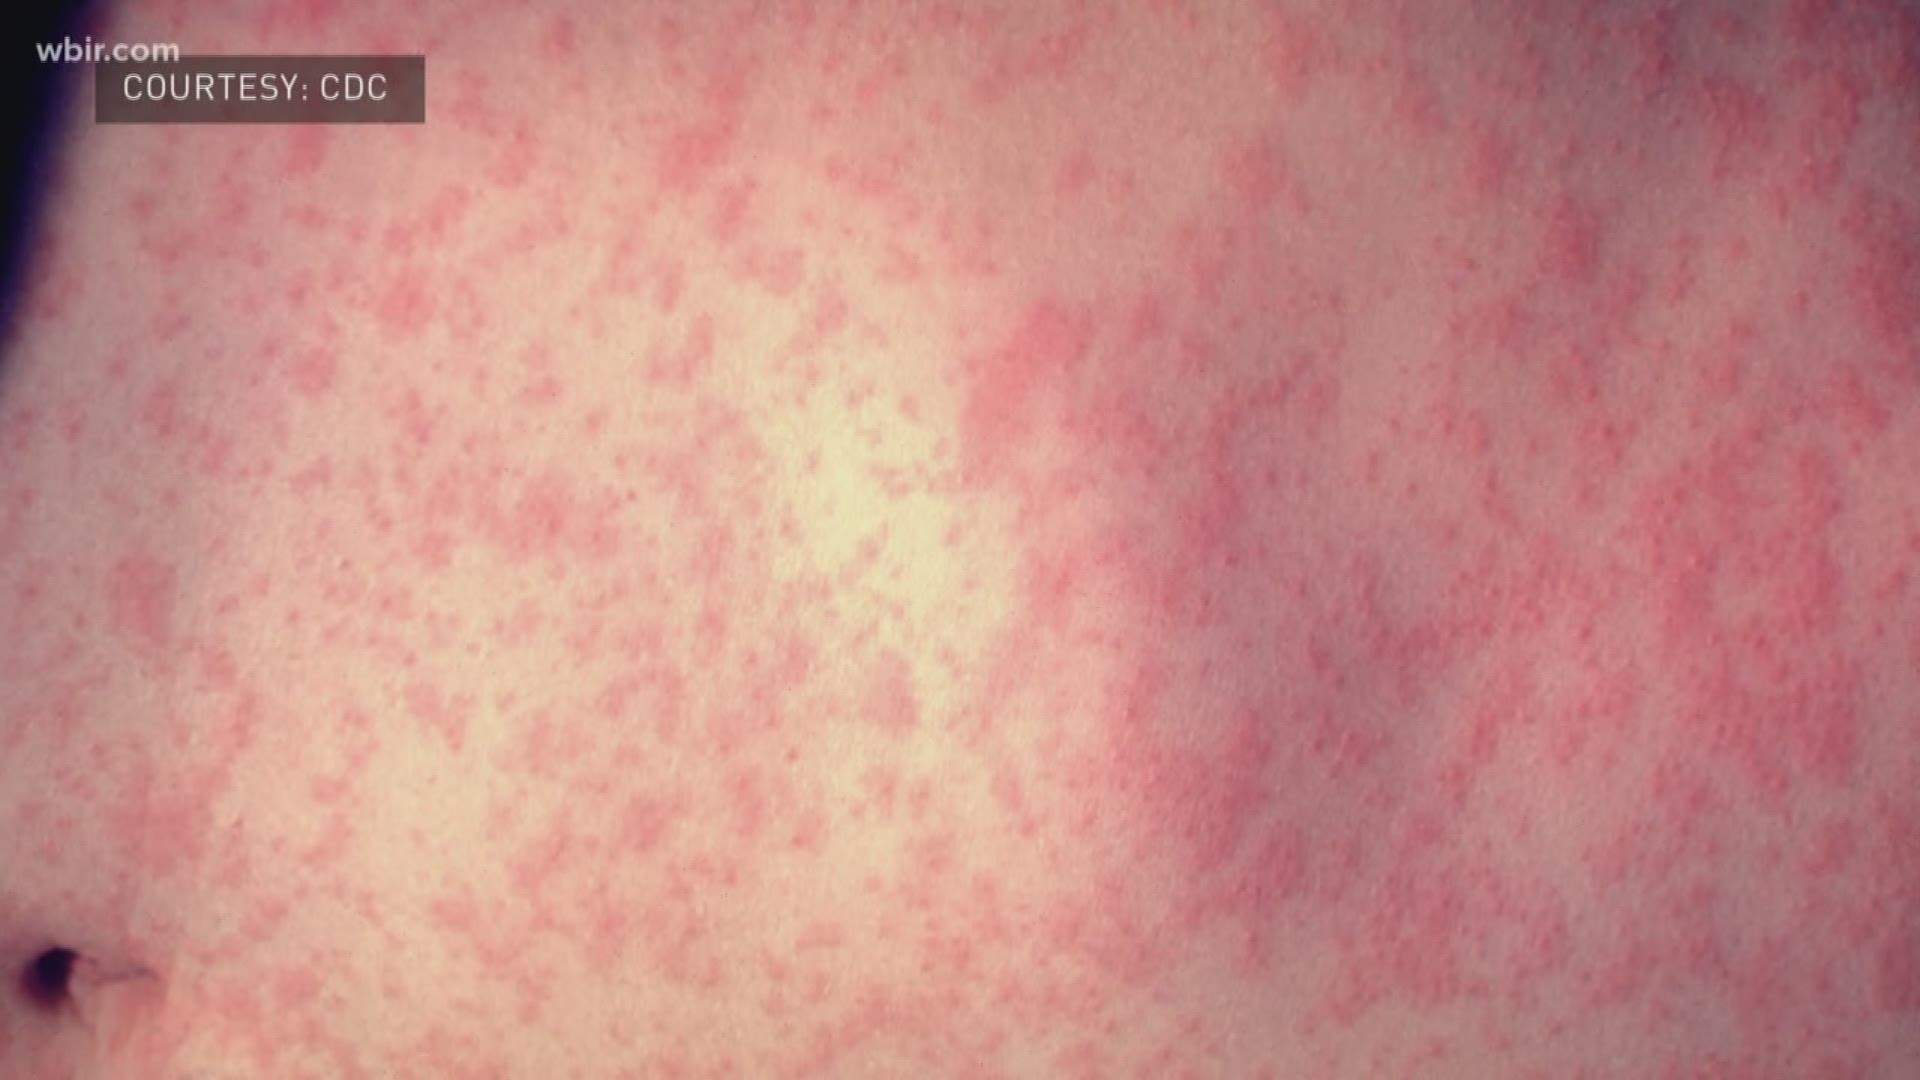 A measles outbreak is spreading across 21 states, including Tennessee.